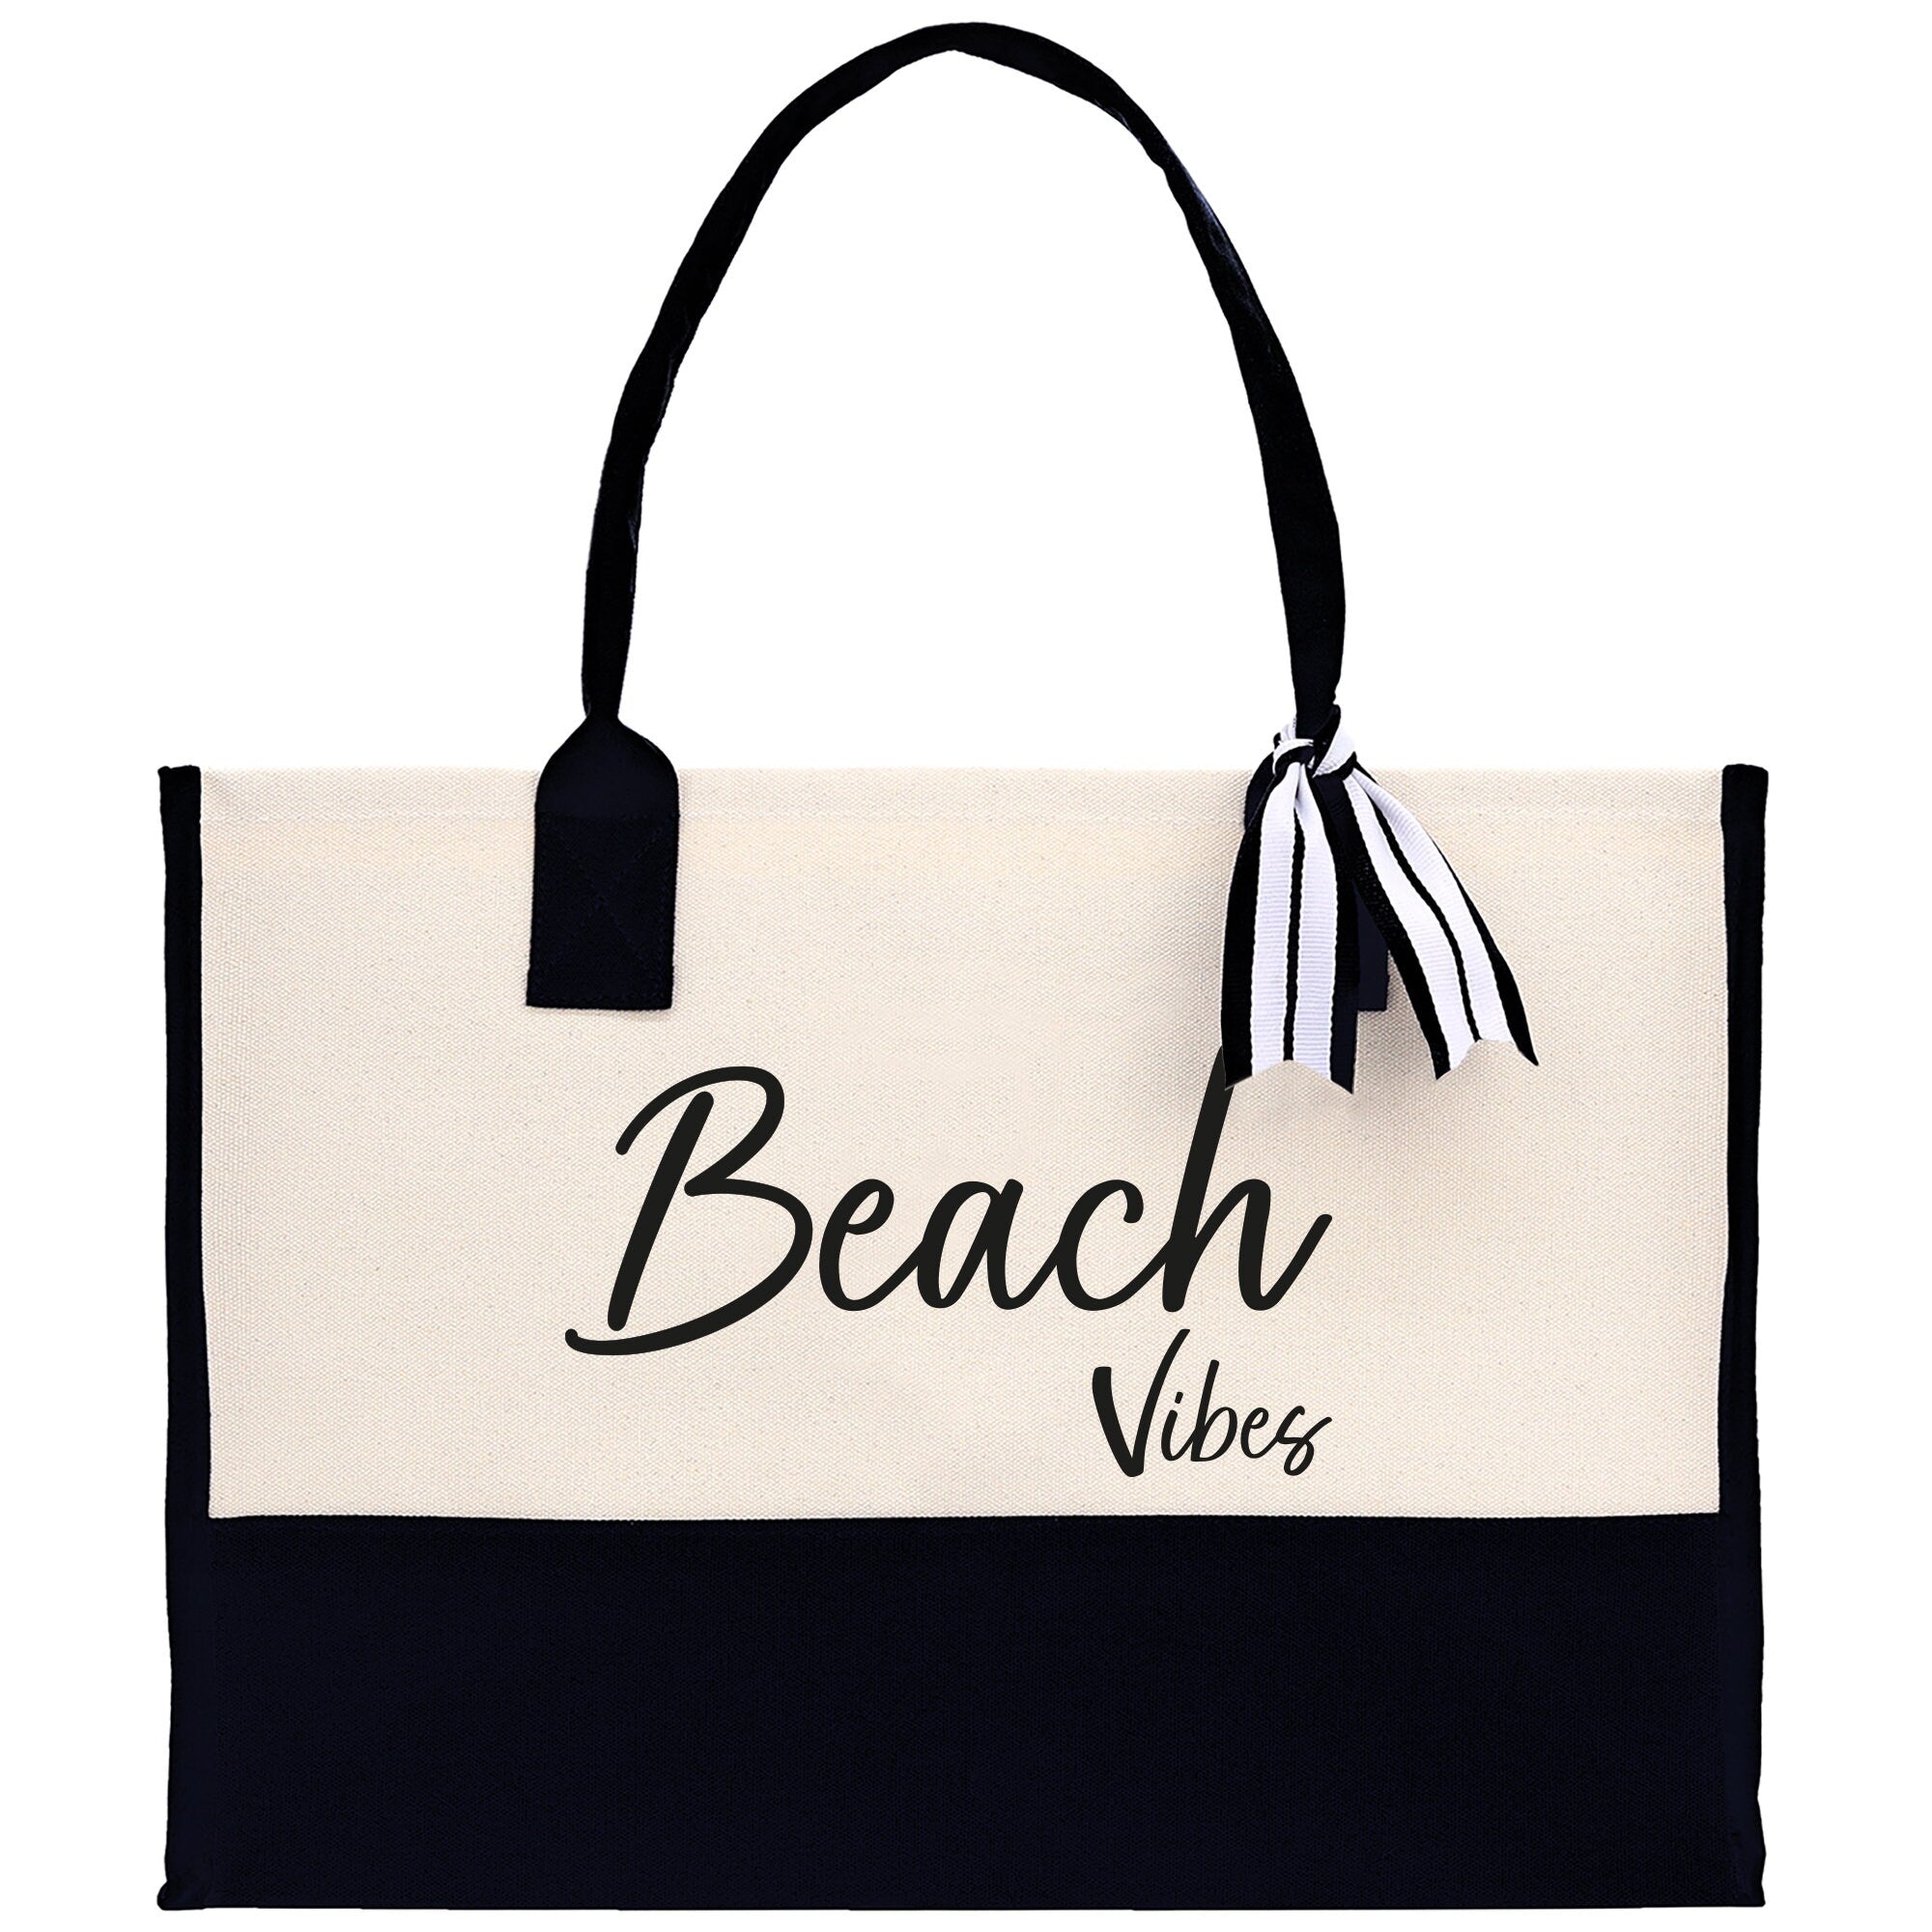 Beach Vibes Canvas Tote Bag Birthday Gift for Her Weekender Tote Bag Beach Tote Bag Large Beach Tote Bag